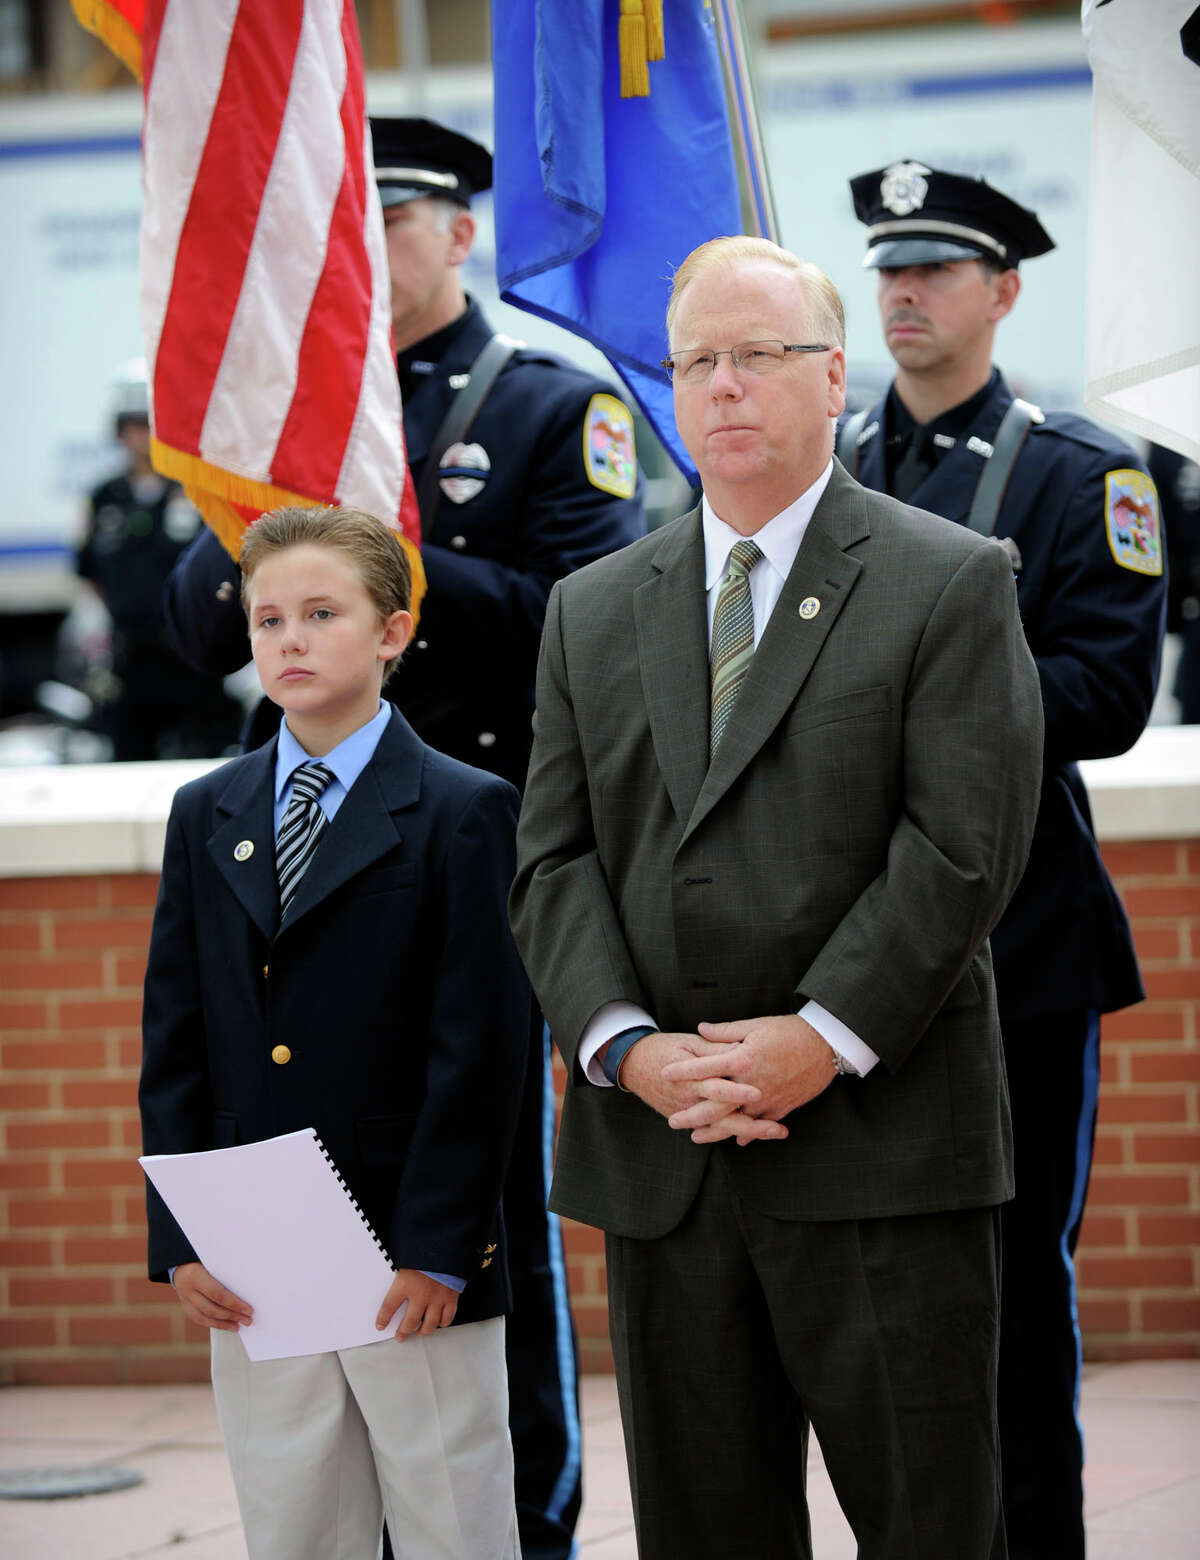 Mayor-for-the Day, Connor Hefferon, 11, a fifth-grader at Great Plain Elementary School, accompanies Danbury Mayor Mark Boughton to the Danbury Police Department's Memorial Service and 28th Annual Awards Ceremony, Wednesday mornning, May 23, 2012.